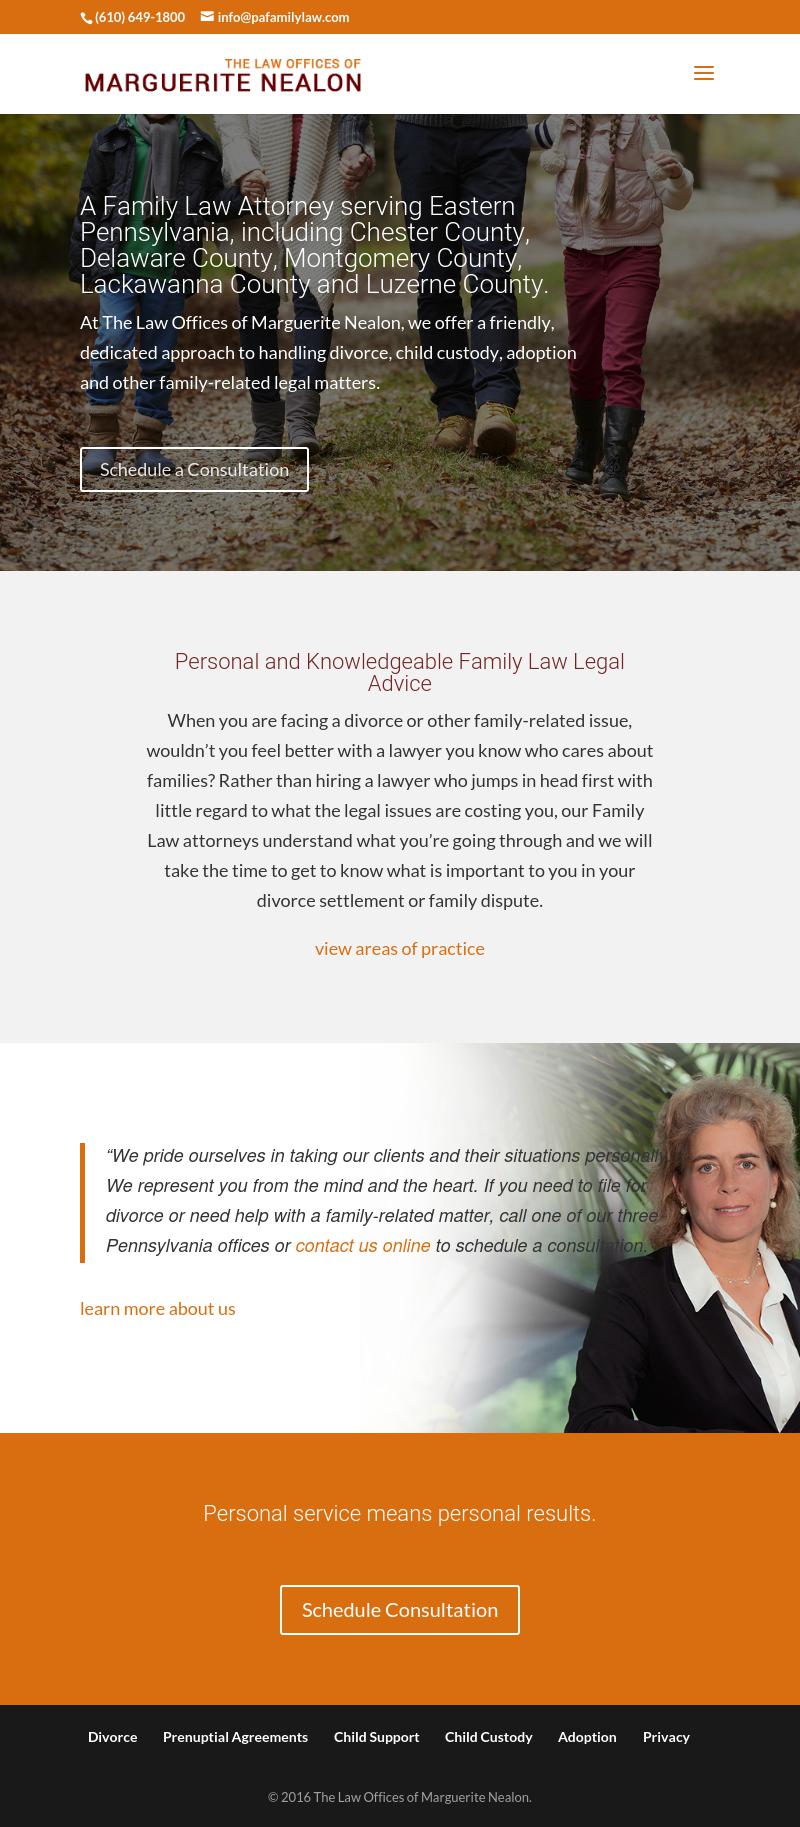 The Law Offices of Marguerite Nealon - Philadelphia PA Lawyers